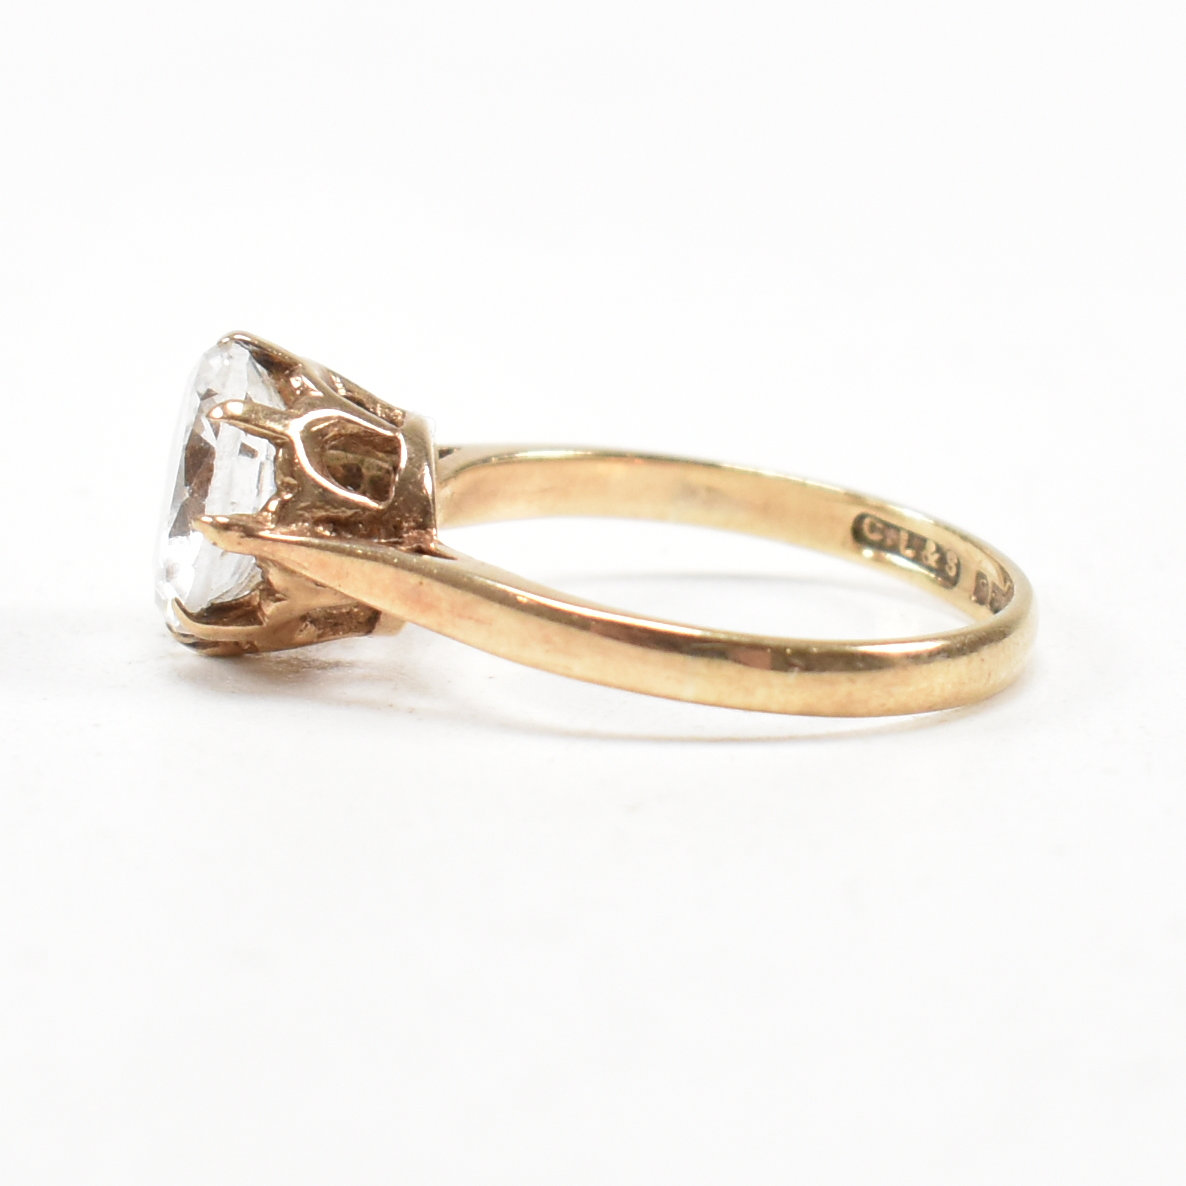 9CT GOLD AND SPINEL SET SINGLE STONE RING - Image 5 of 10